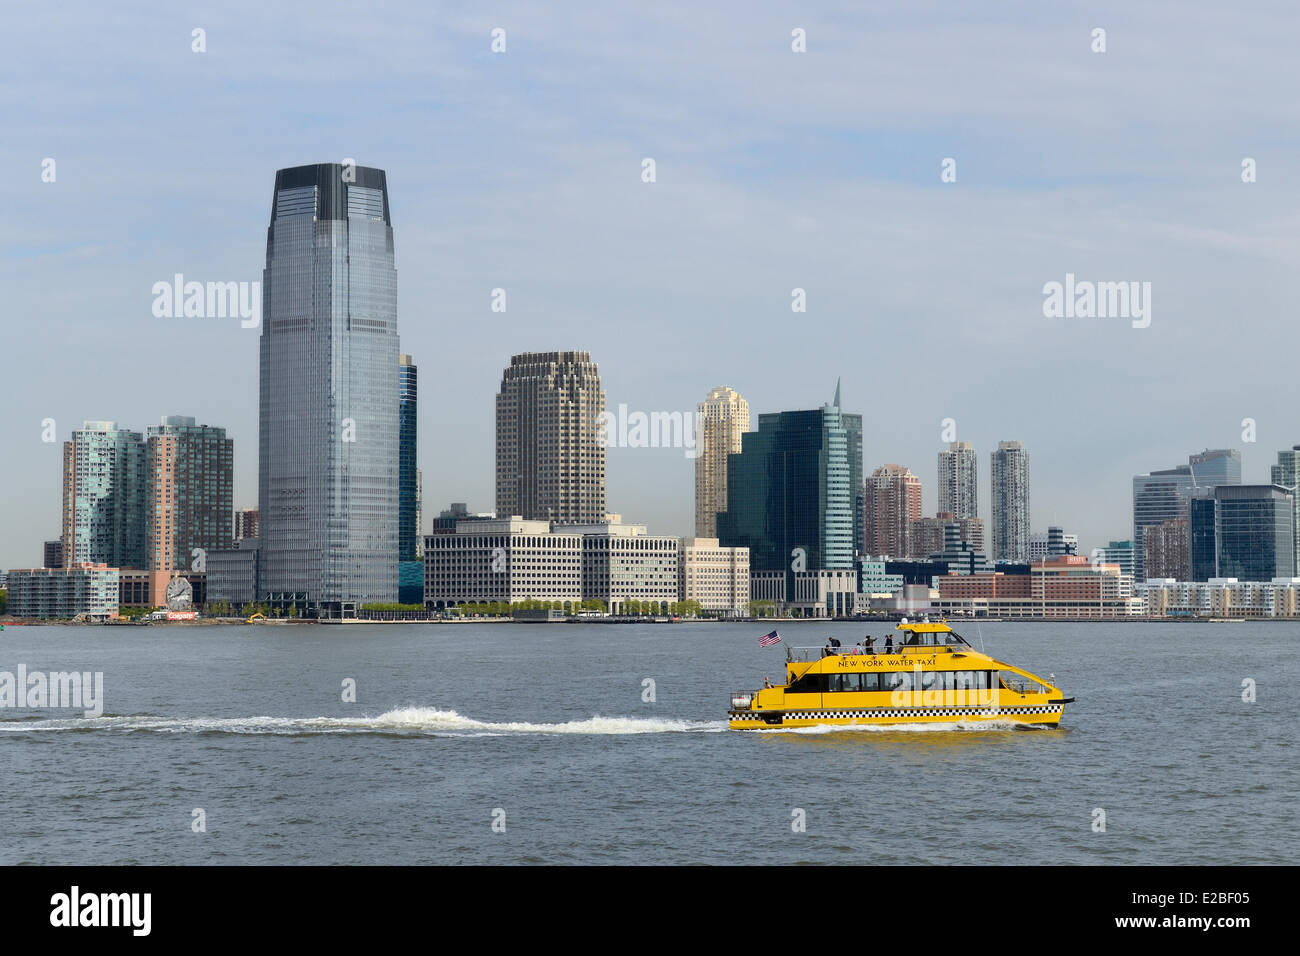 United States, New Jersey, Jersey City on the Hudson River, taxi boat (New York Water Taxi) Stock Photo